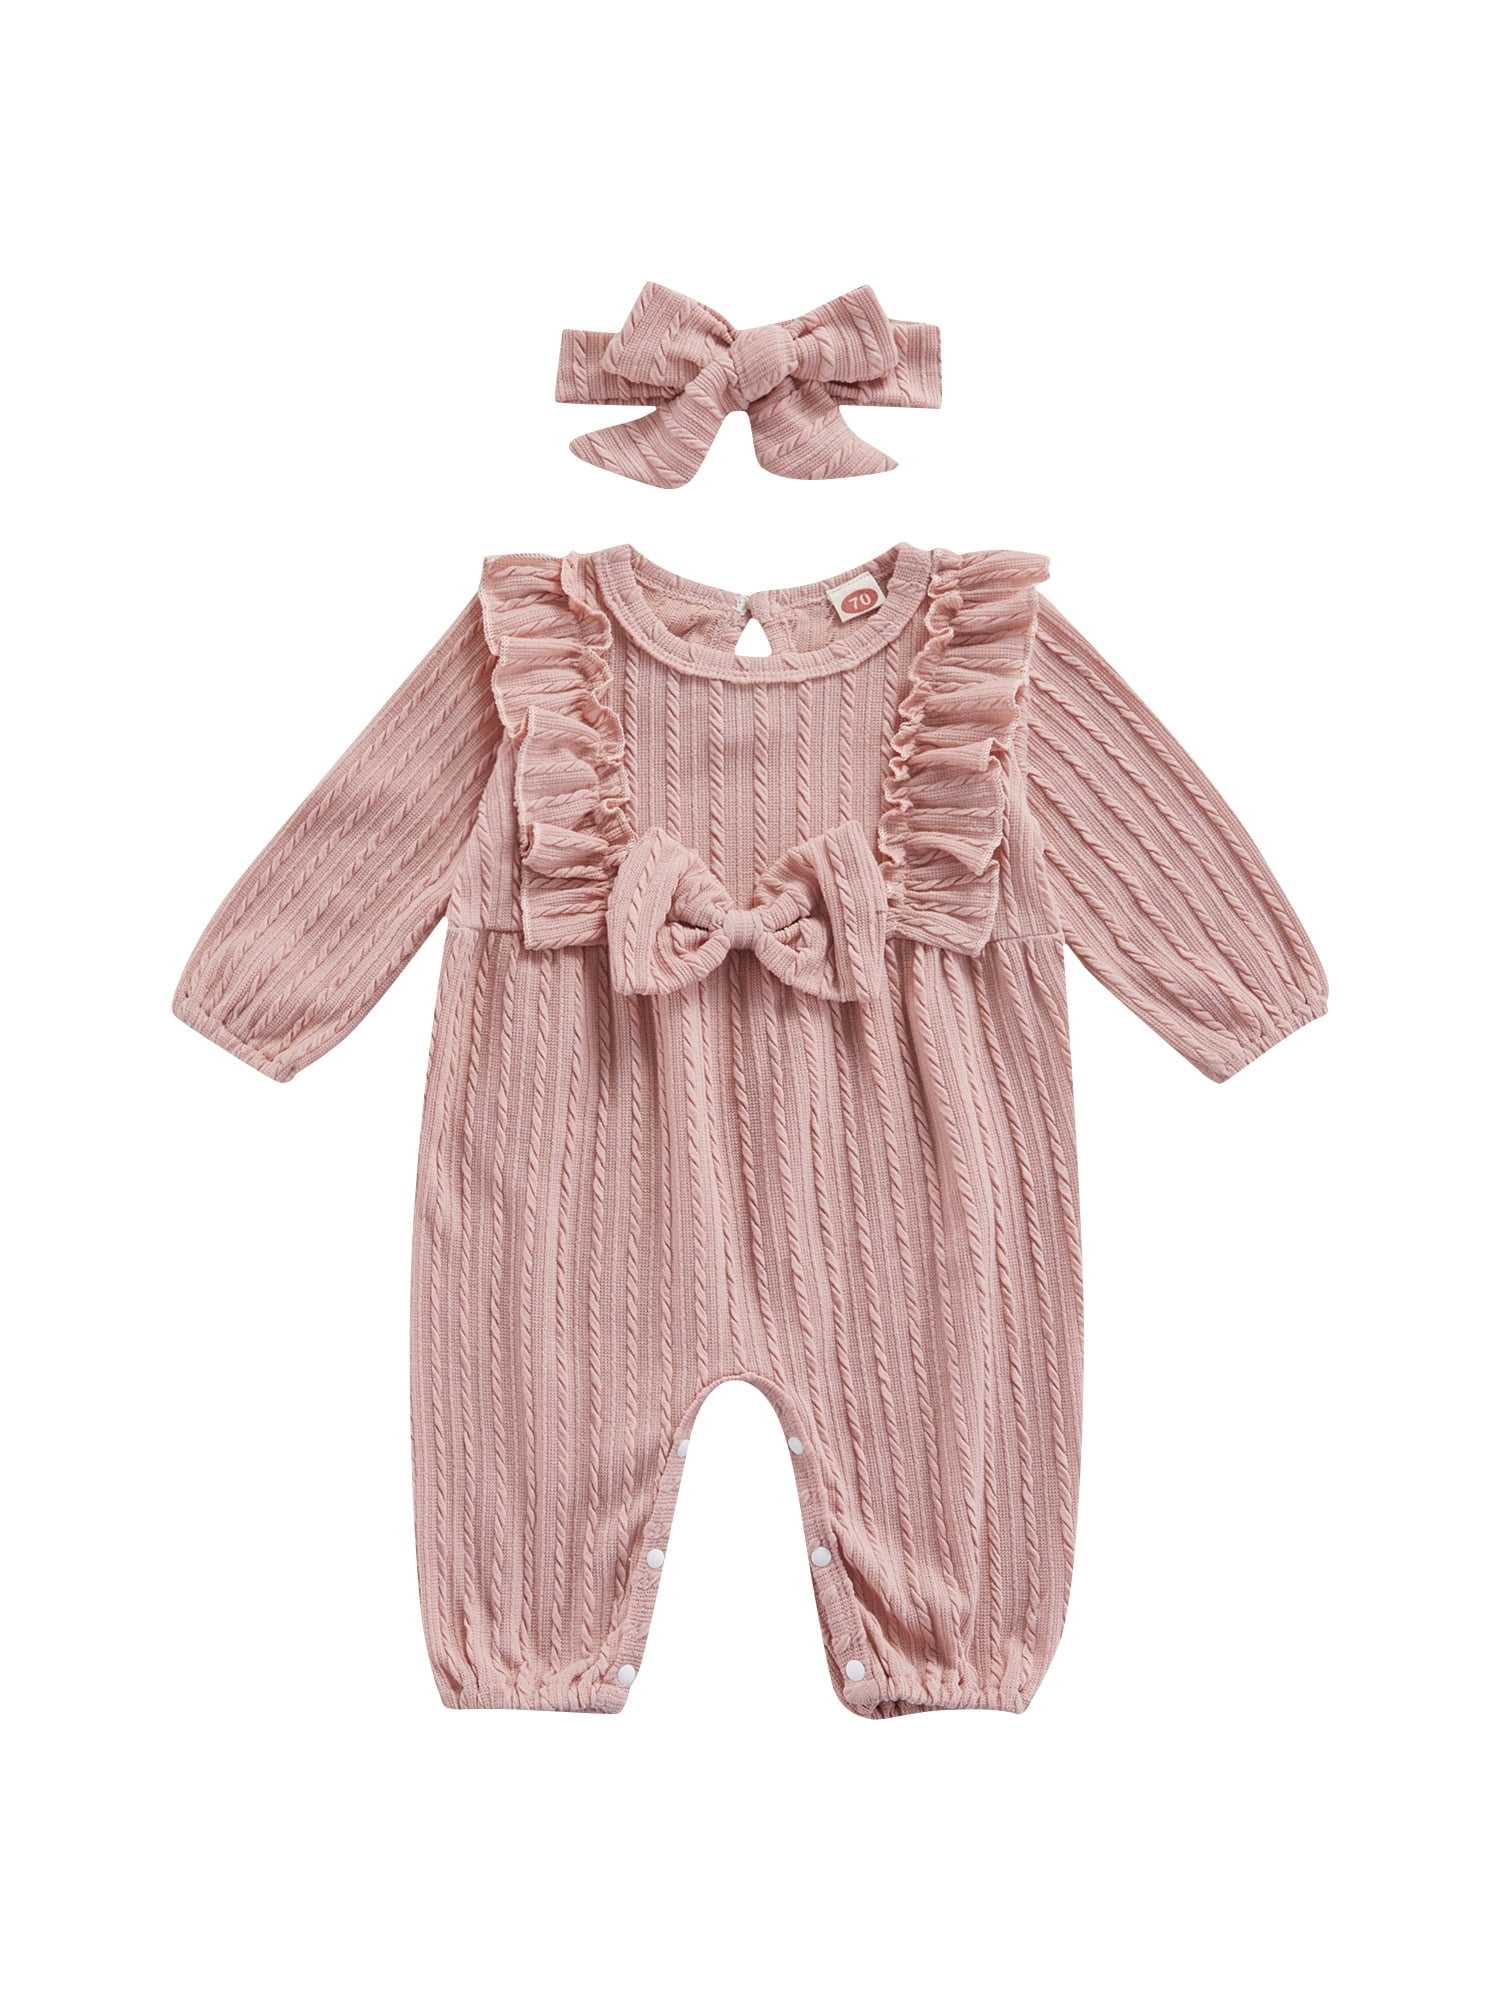 Infant Baby Girls Long Sleeve Cotton Bow Ruffles Solid Romper Jumpsuit Clothes 